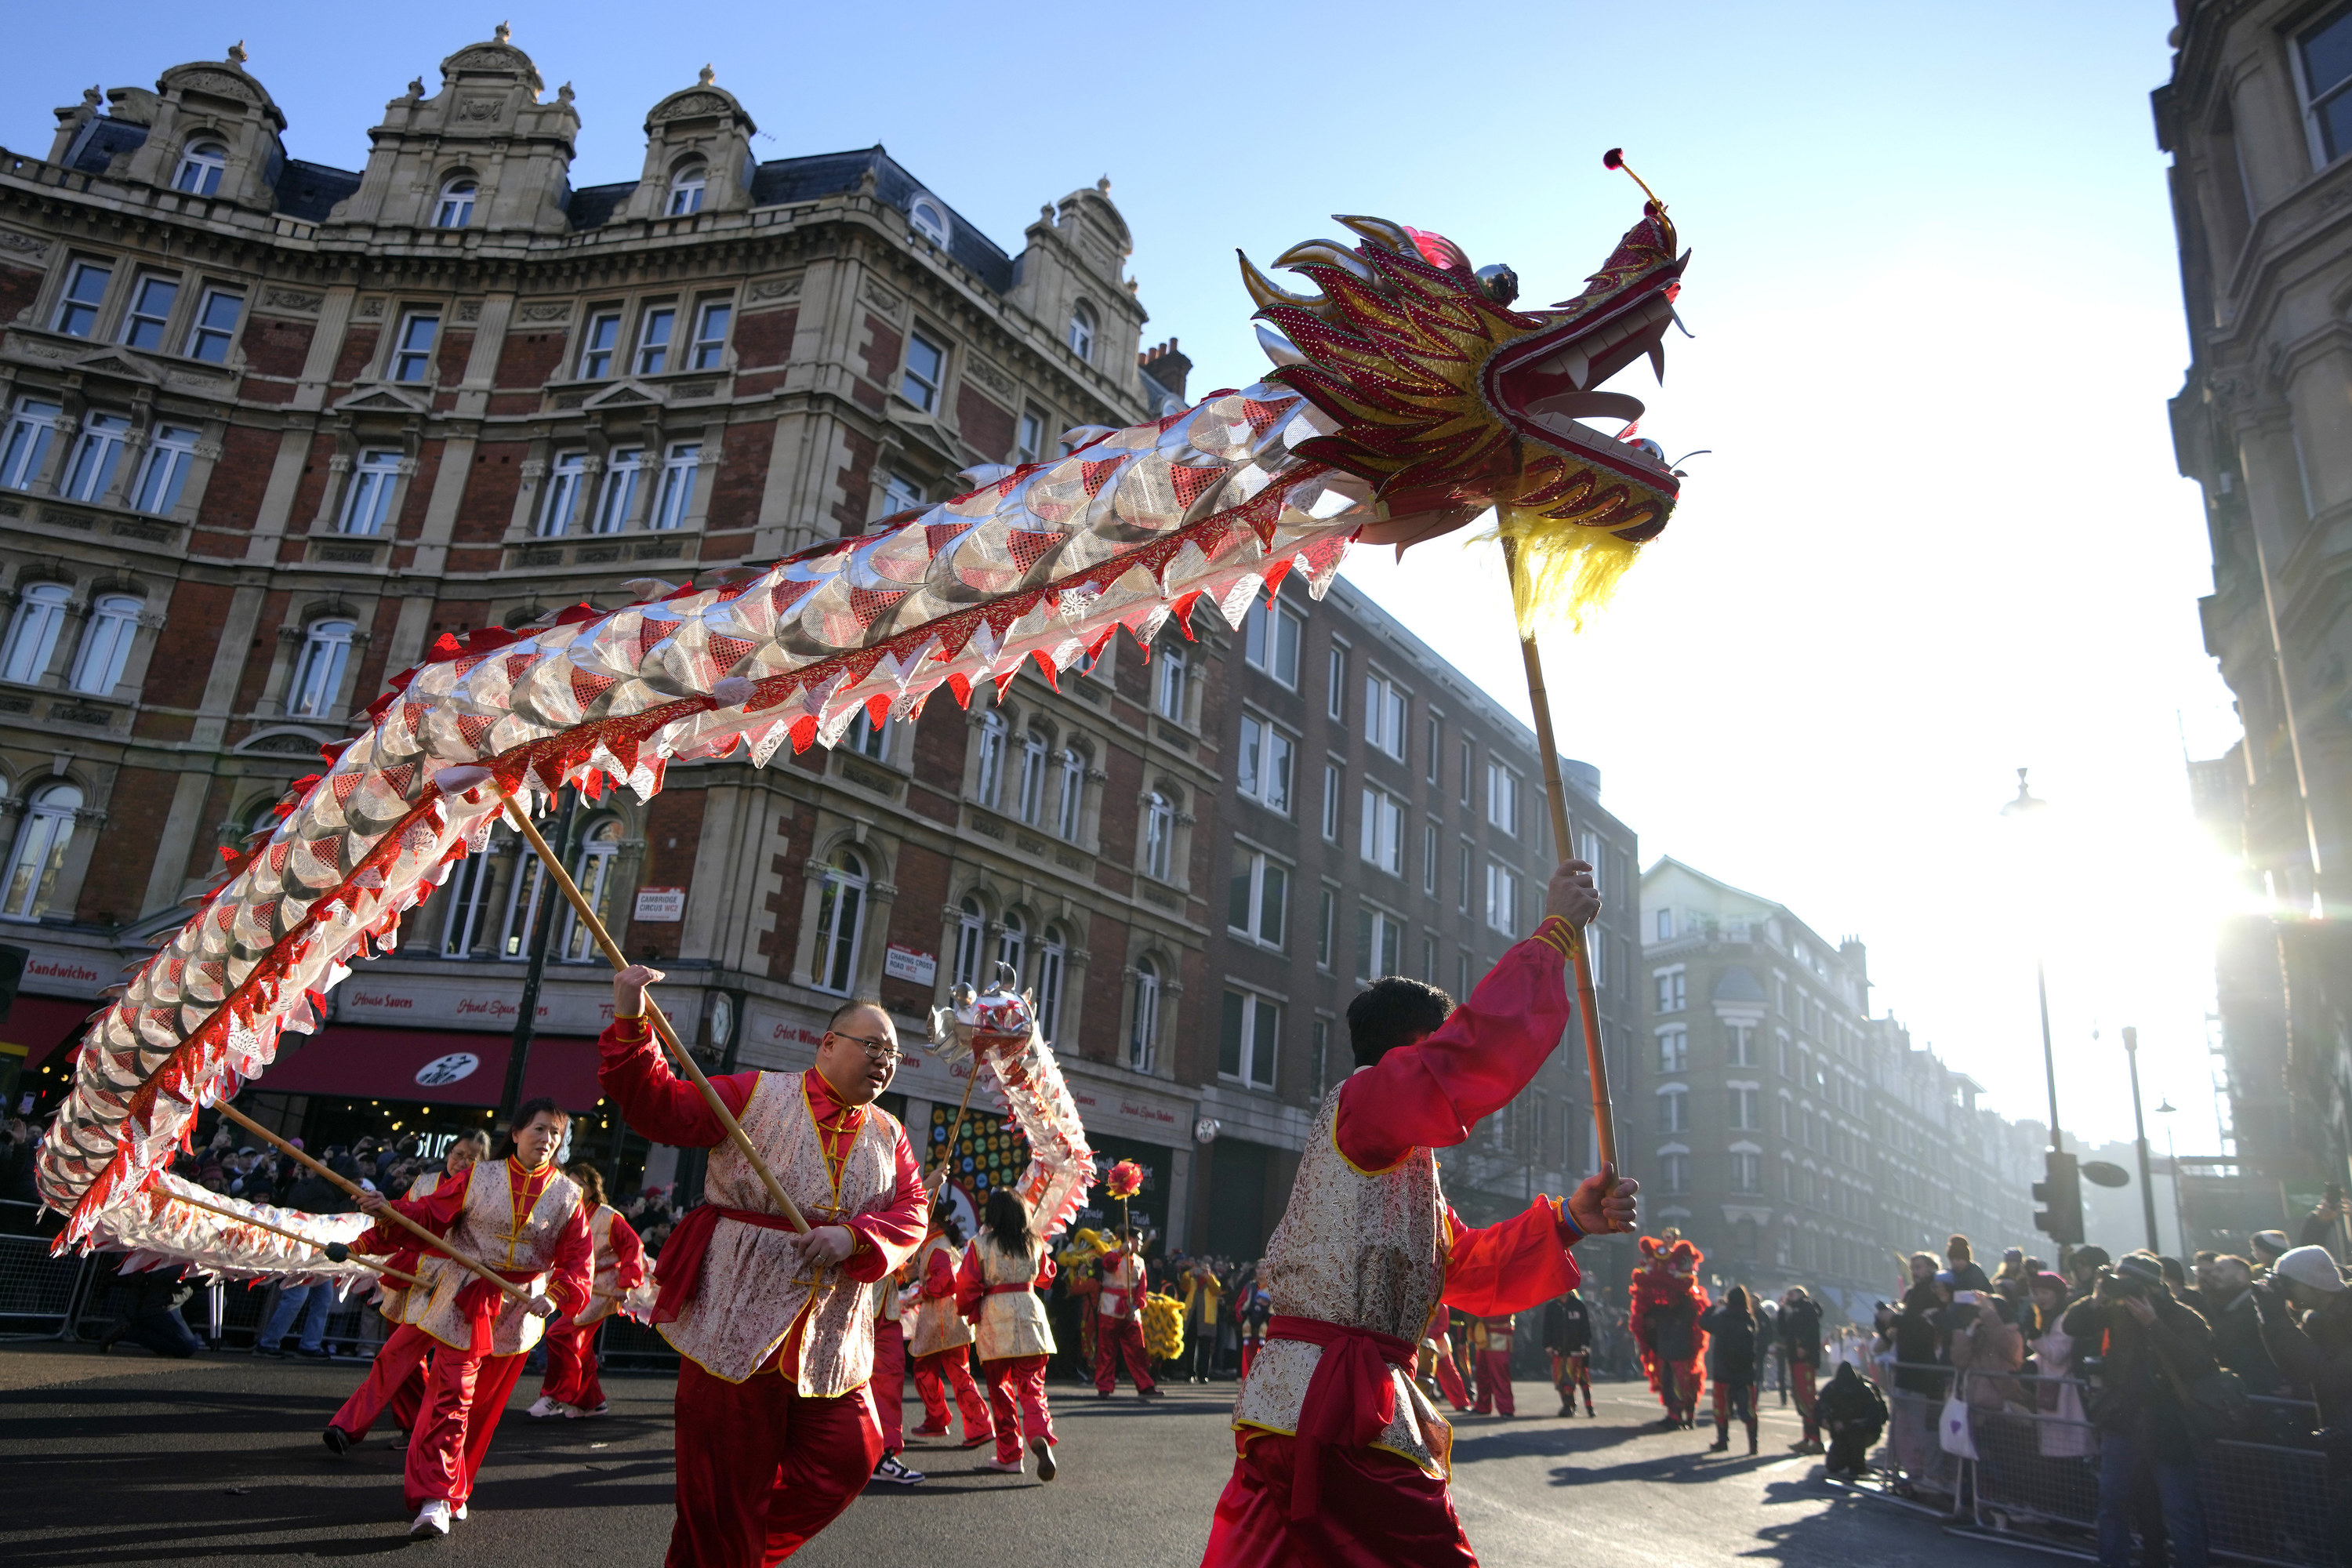 People dressed in red run through a street in London holding up a long paper dragon